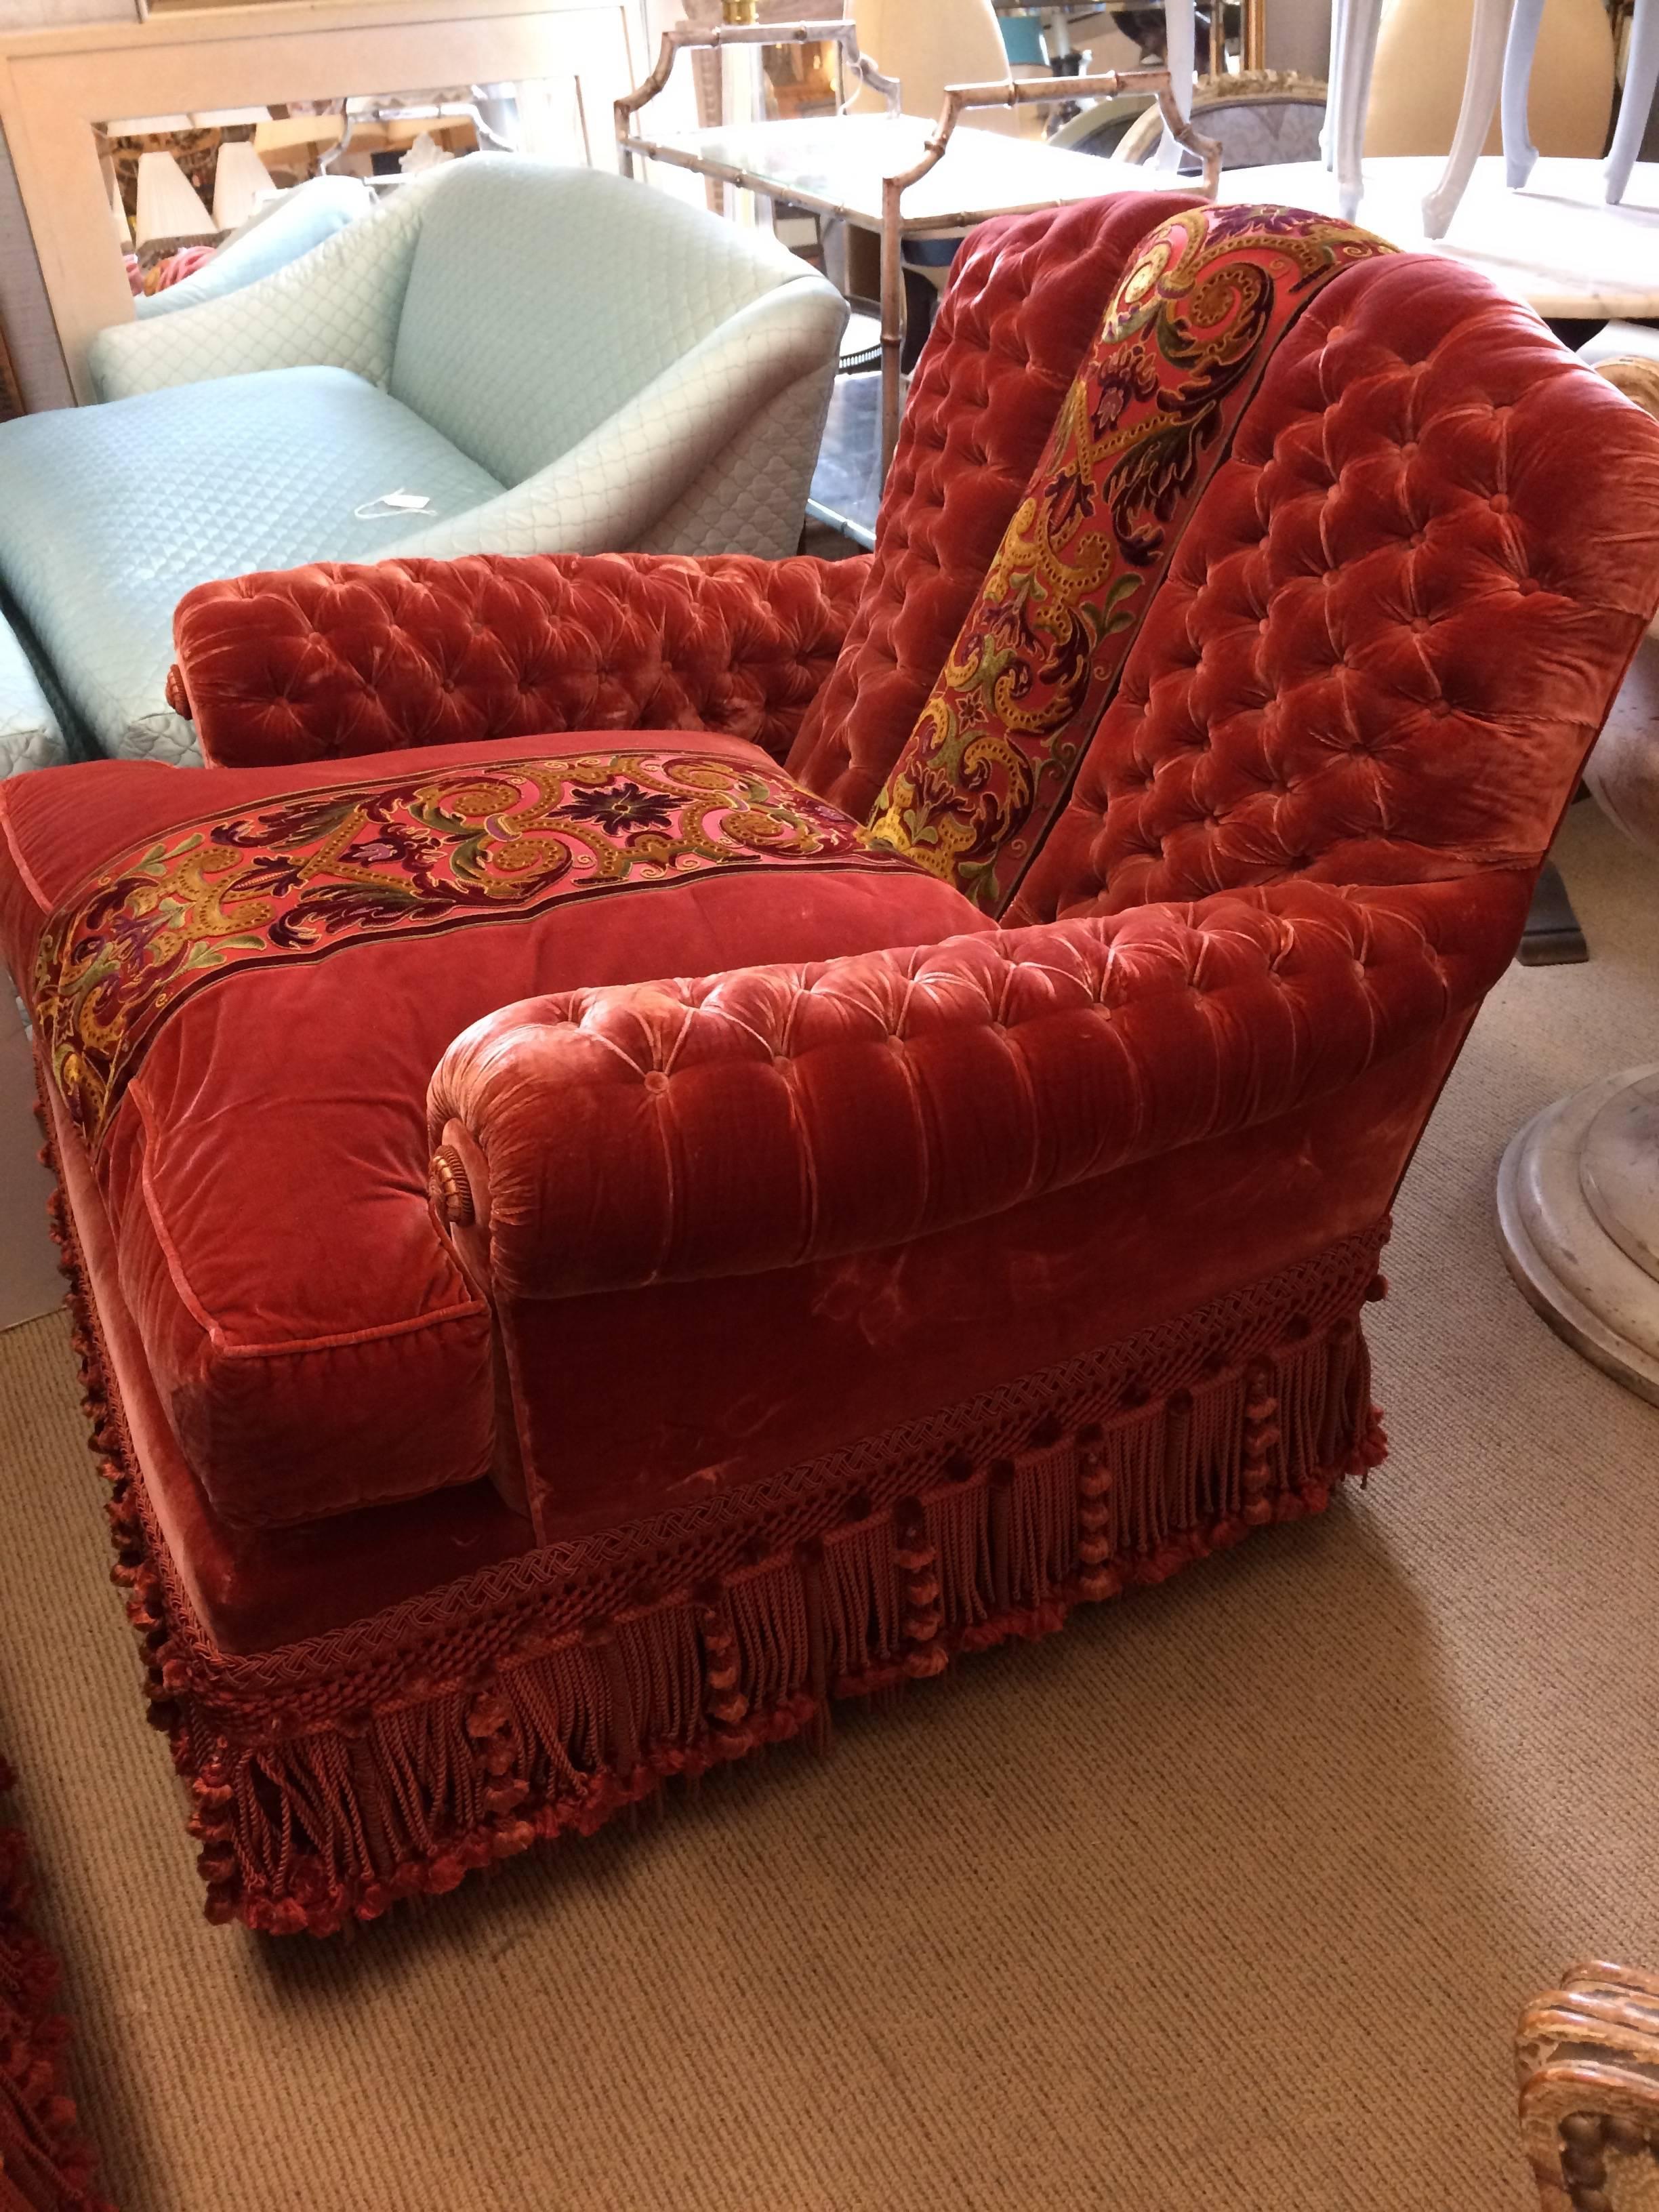 The penultimate pair of chic Parisian silk velvet club chairs, upholstered with amazing craftsmanship in an unusual soft color that on the artist's palette would
be a mix of red oxide, yellow oxide, raw umber and white. The ornately tufted back and